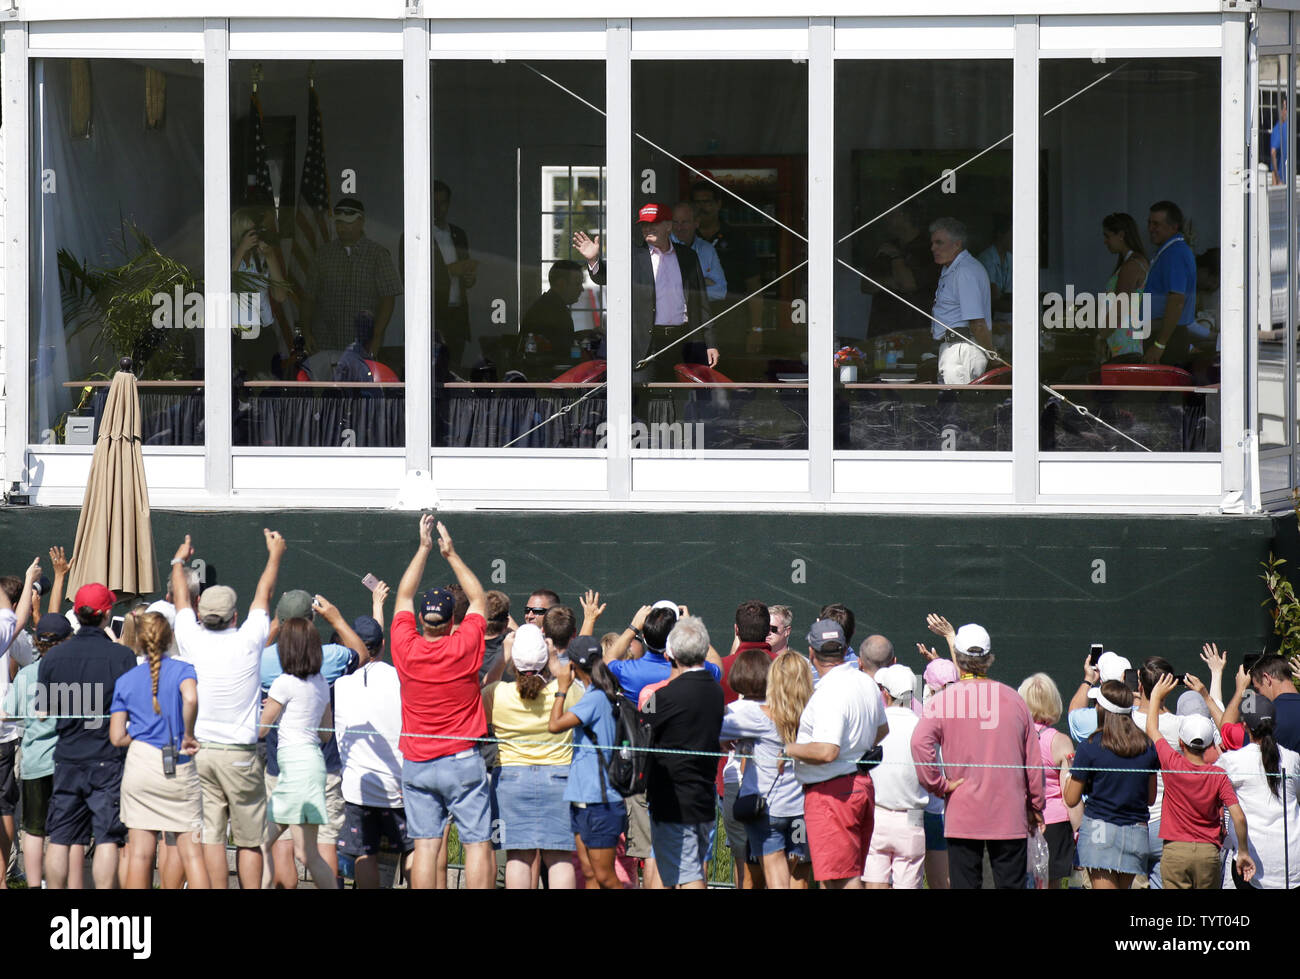 United States President Donald Trump waves at fans from his viewing booth at Trump National Golf Club for the final round of the LPGA U.S. Women's Open Championship  in Bedminster, NJ on July 14, 2017.     Photo by John Angelillo/UPI Stock Photo